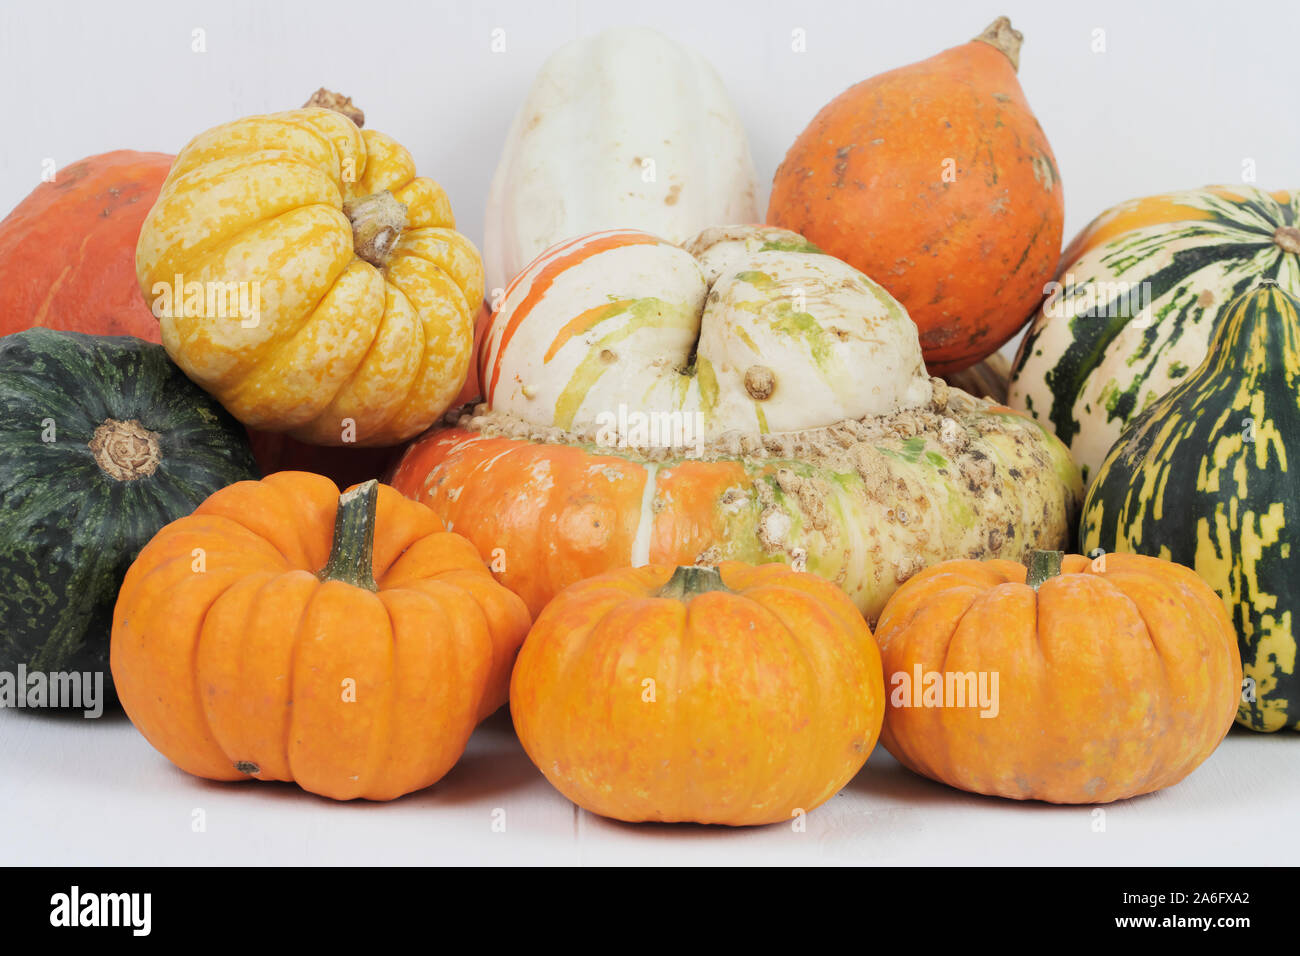 A selection of autumnal pumpkins and squashes Stock Photo